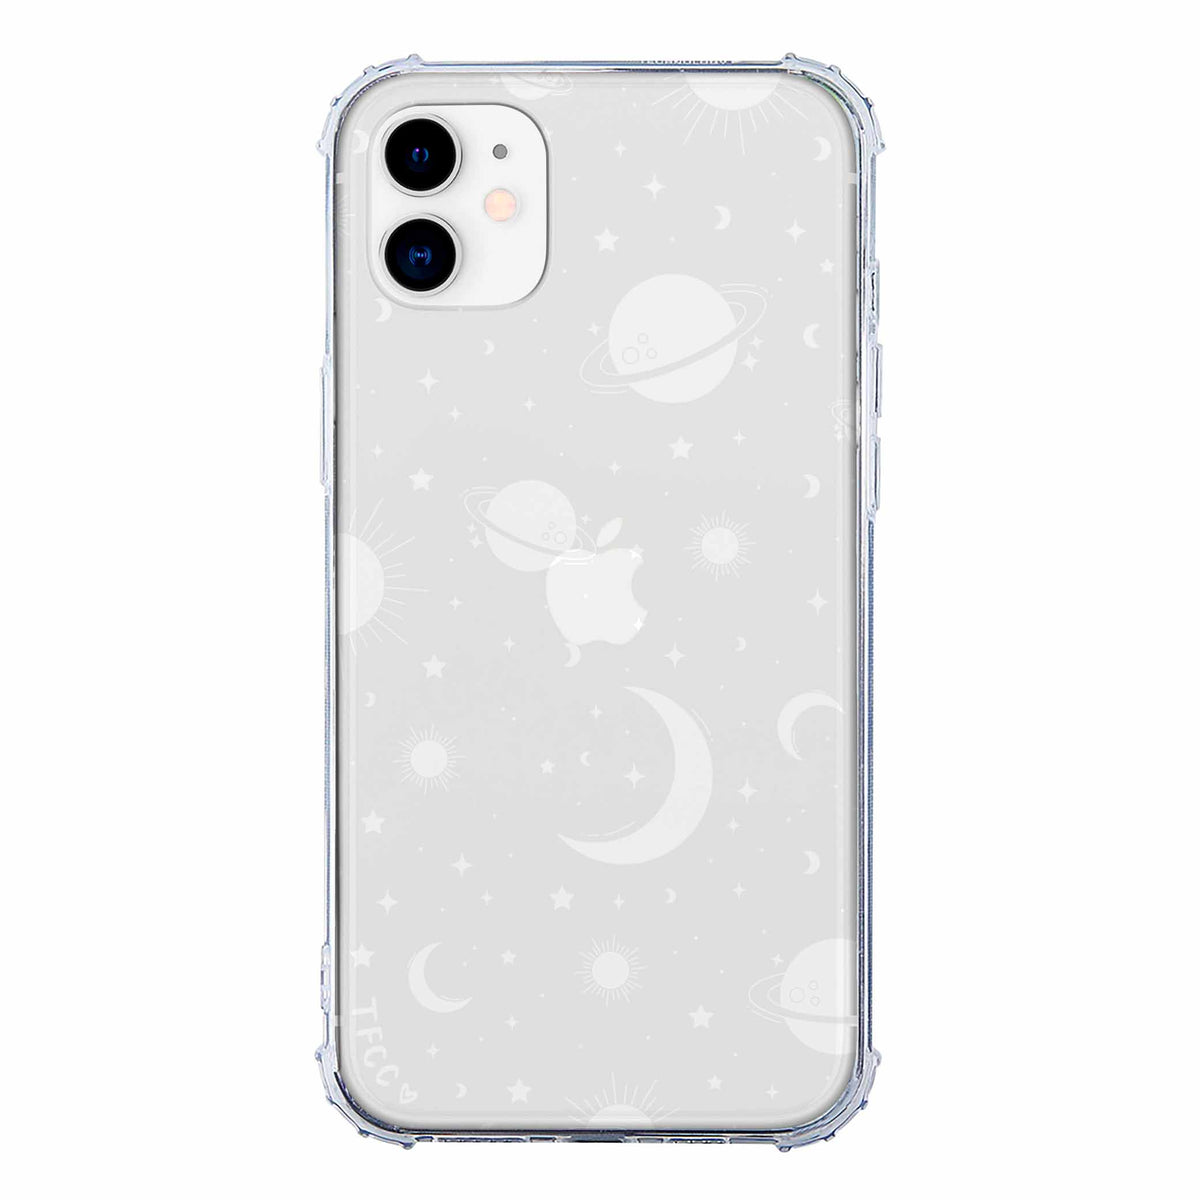 STARS AND MOON CELESTIAL WHITE CLEAR CASE - thefonecasecompany